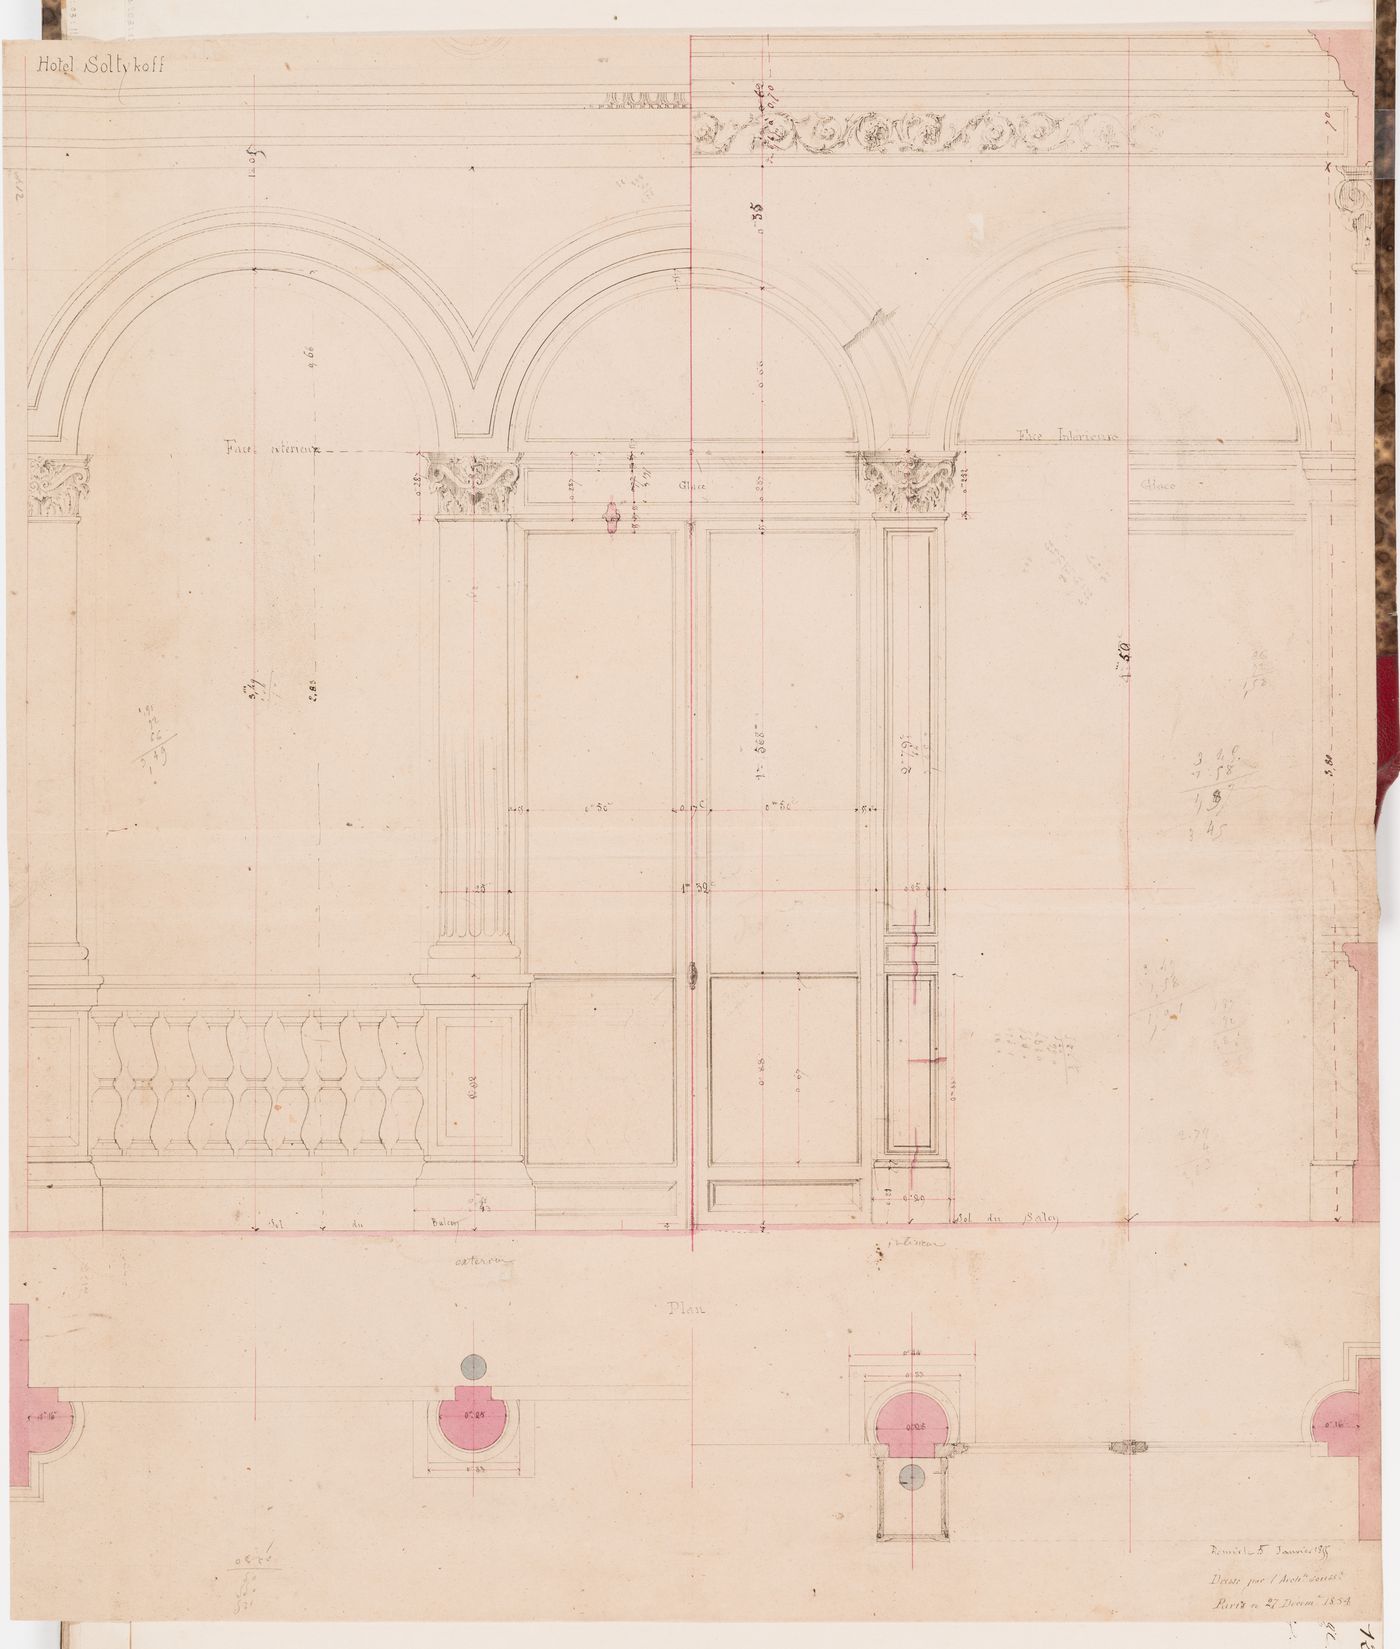 Partial elevations with profiles and a plan for the interior and exterior walls for the first floor of the principal façade, Hôtel Soltykoff